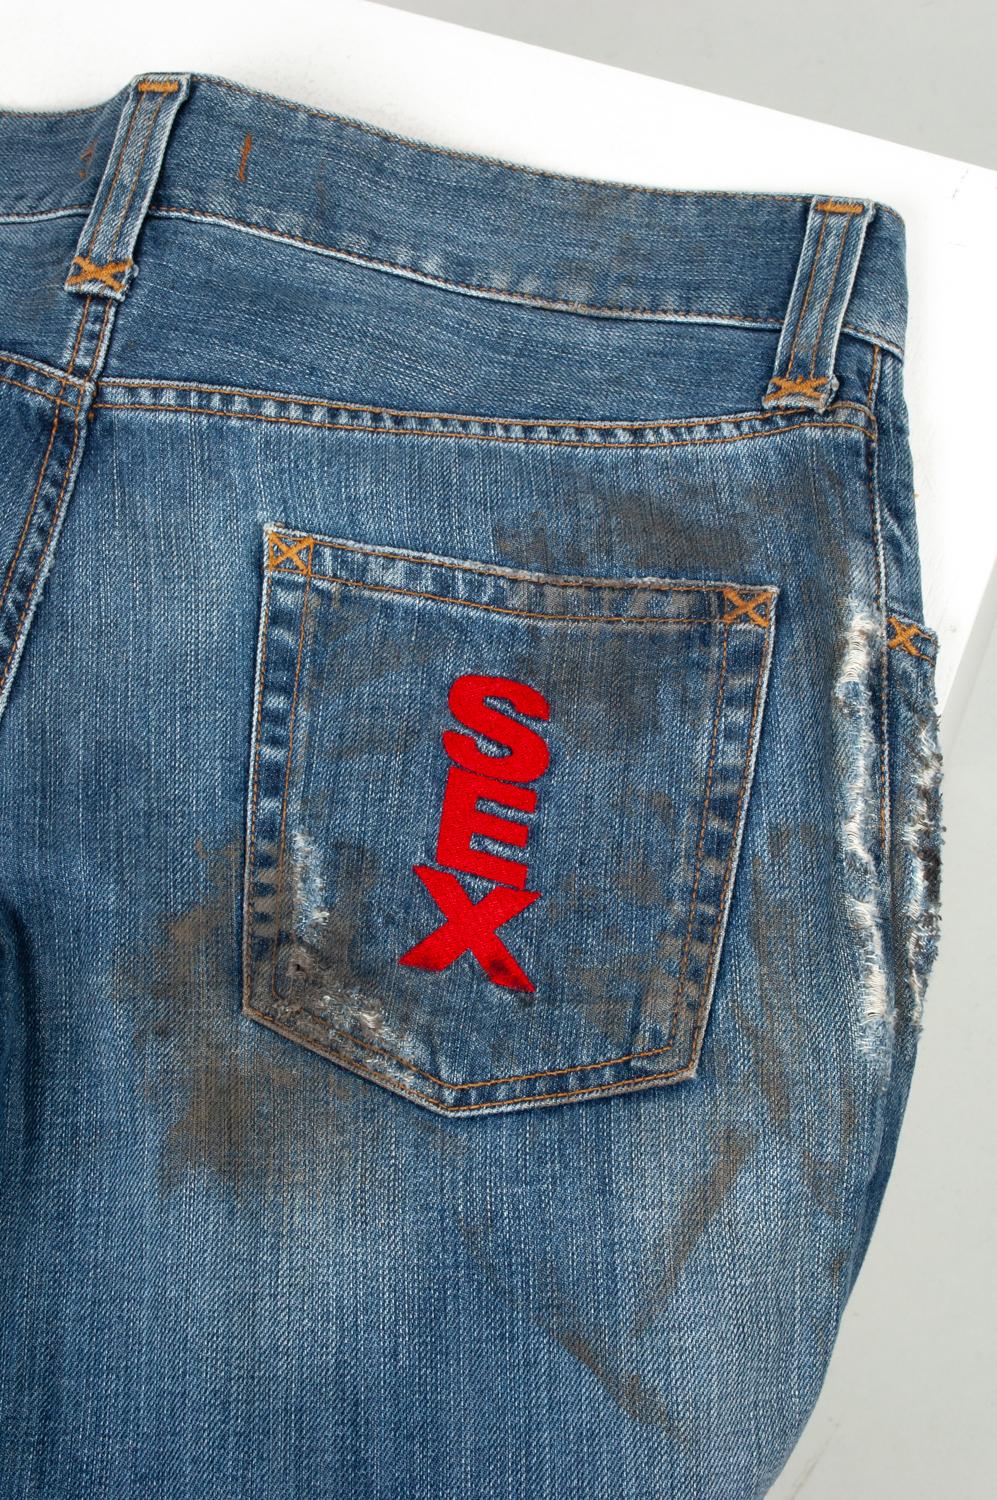 100% genuine Dolce Gabbana Distressed Sex Dirty Ripped Jeans
Color: blue
(An actual color may a bit vary due to individual computer screen interpretation)
Material: 100% cotton
Tag size: ITA 50
These jeans are great quality item. Rate 9 of 10,